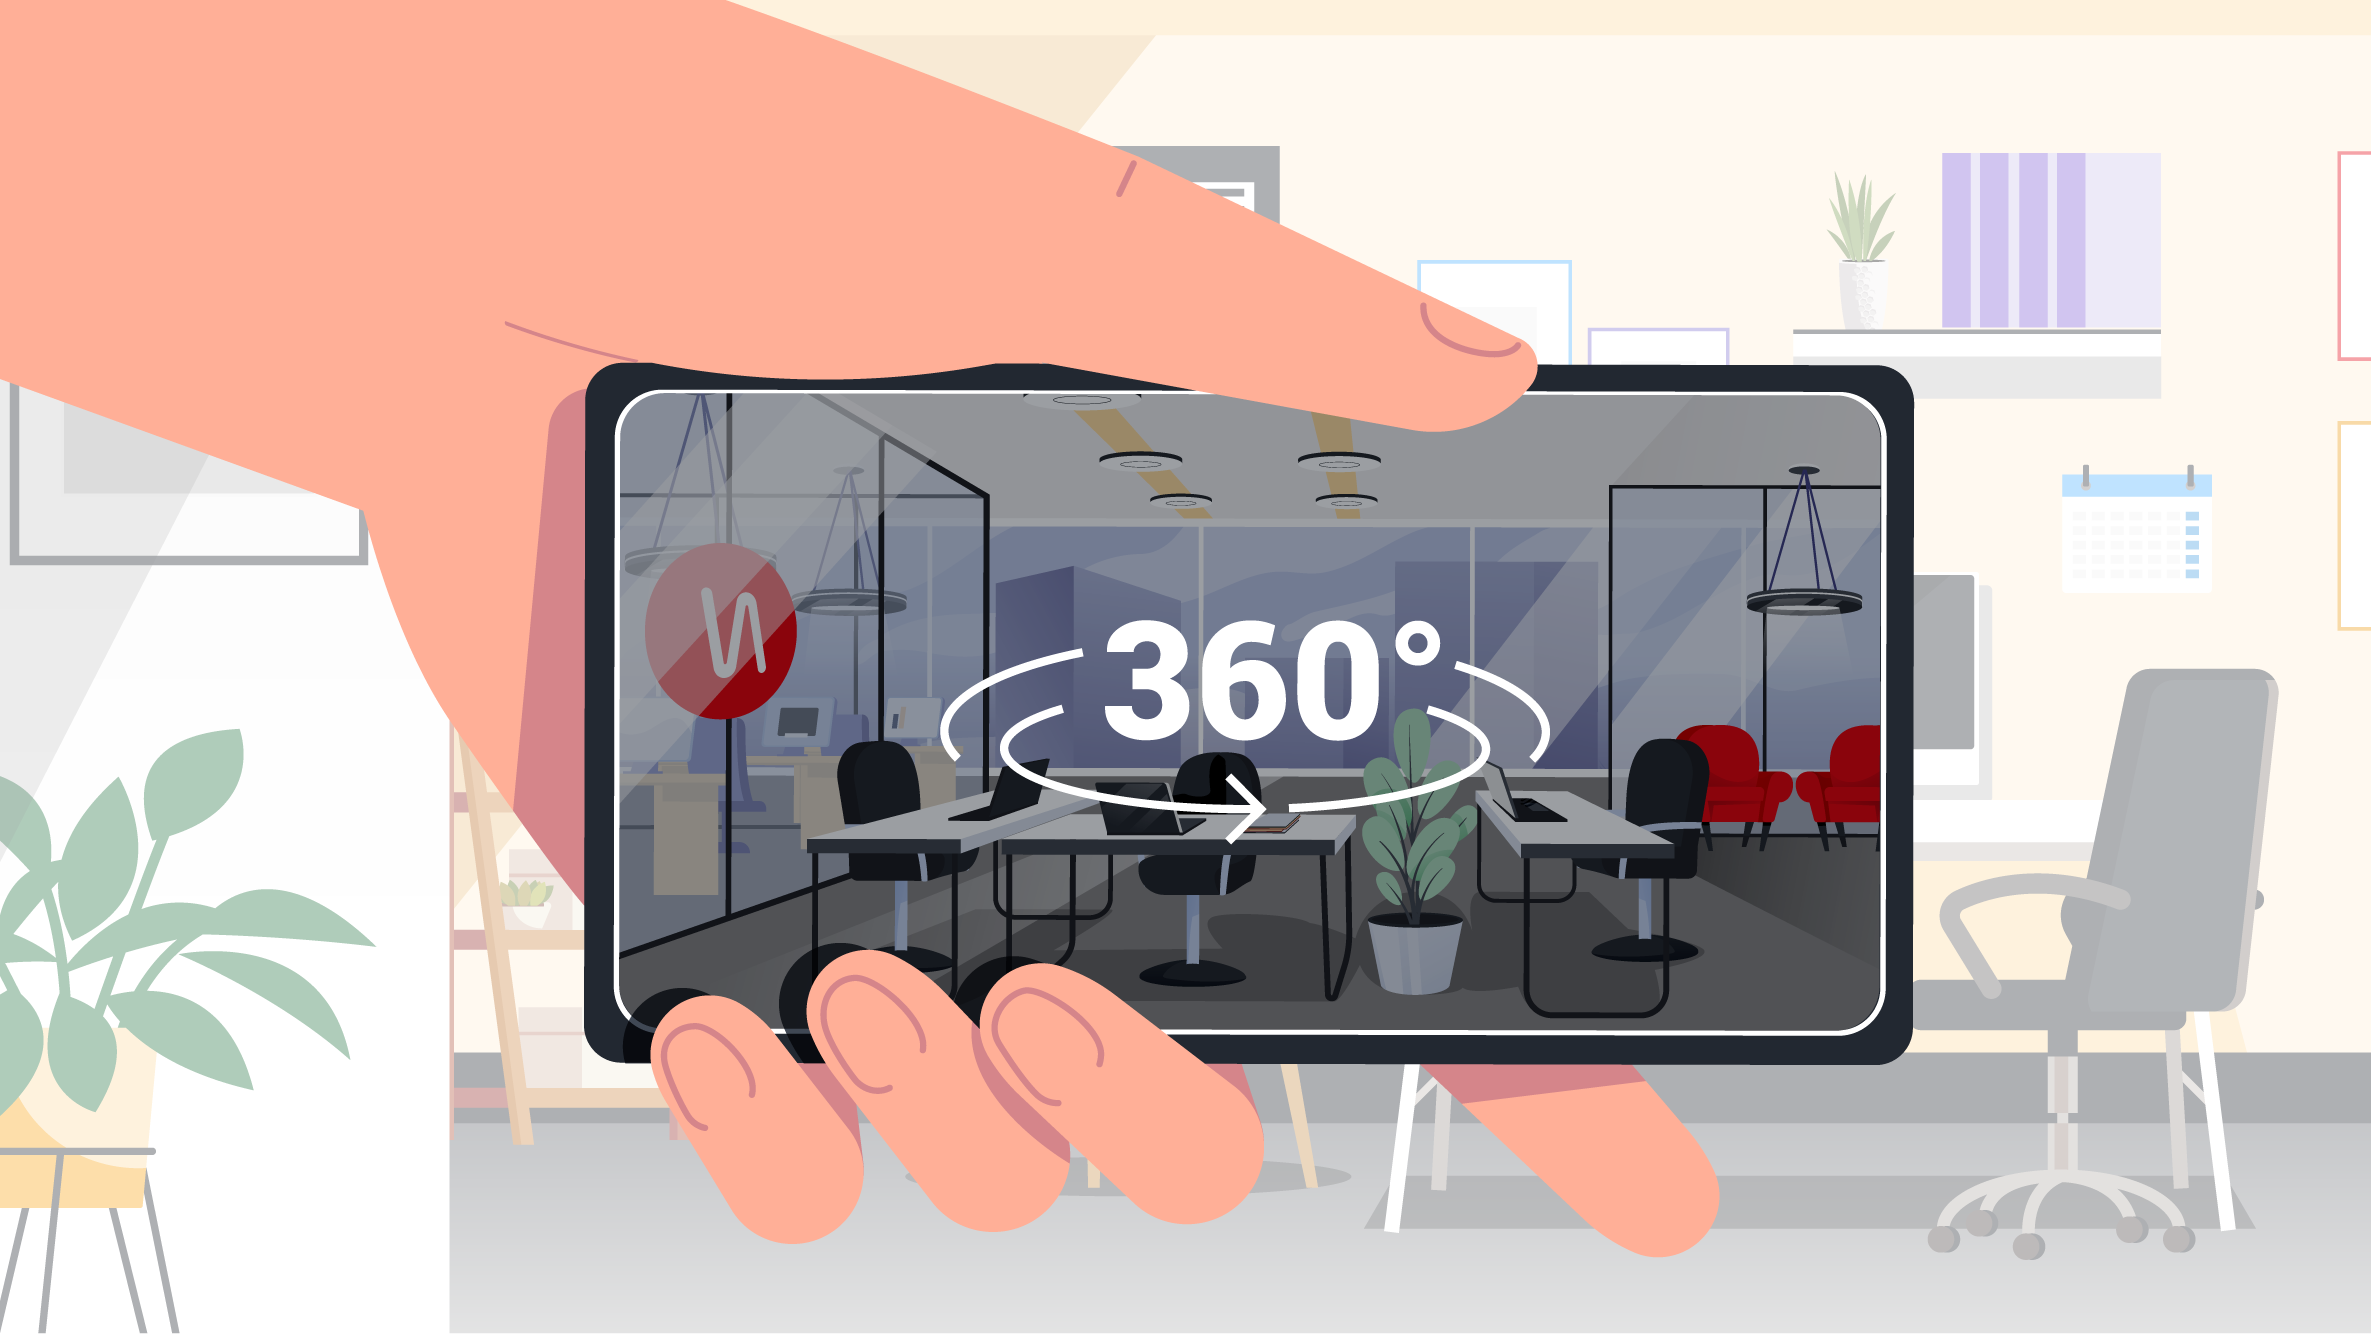 Illustration of a learner using their smartphone to see 360° content